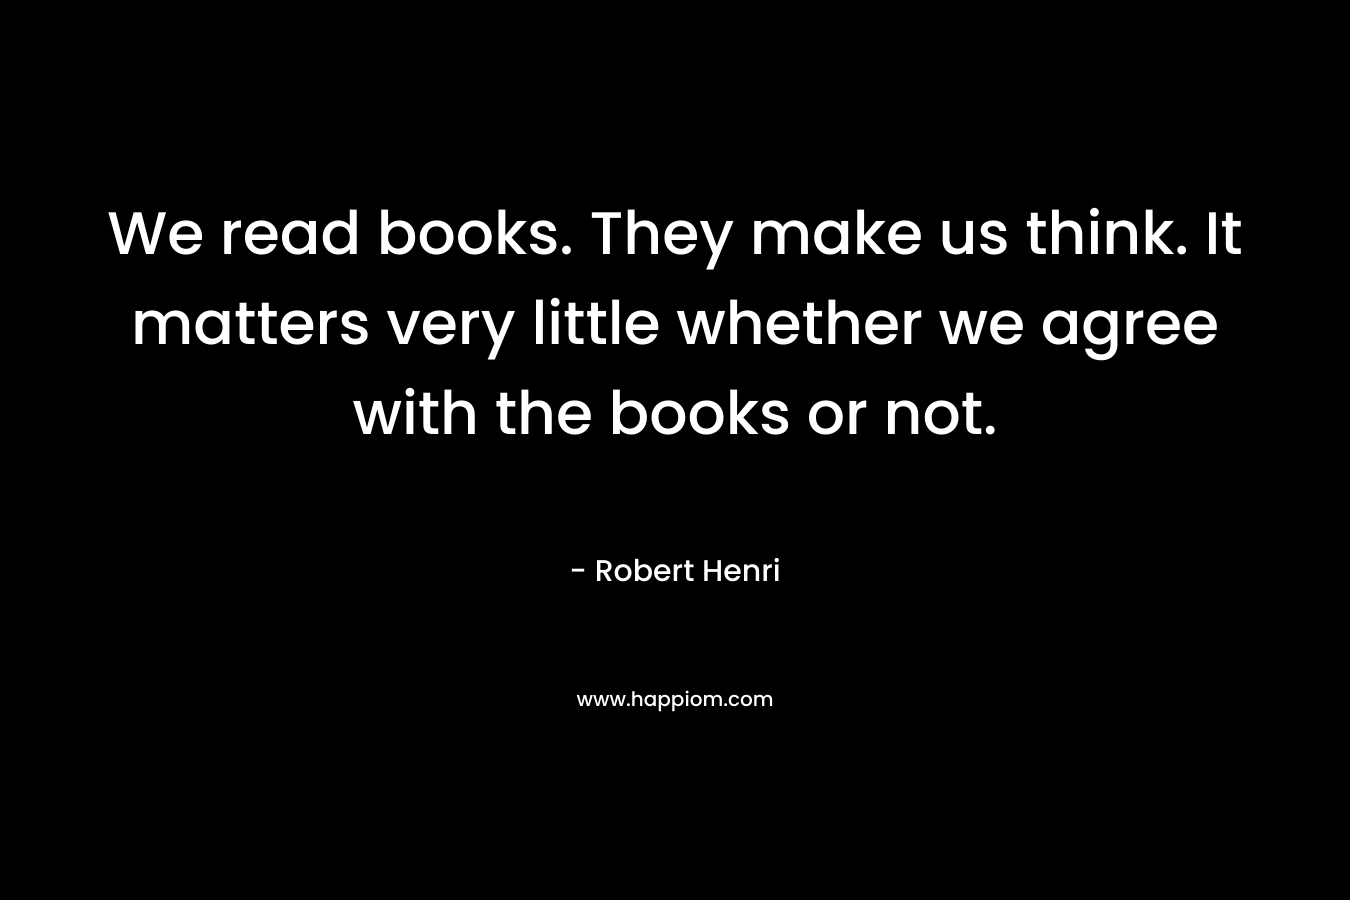 We read books. They make us think. It matters very little whether we agree with the books or not. – Robert Henri